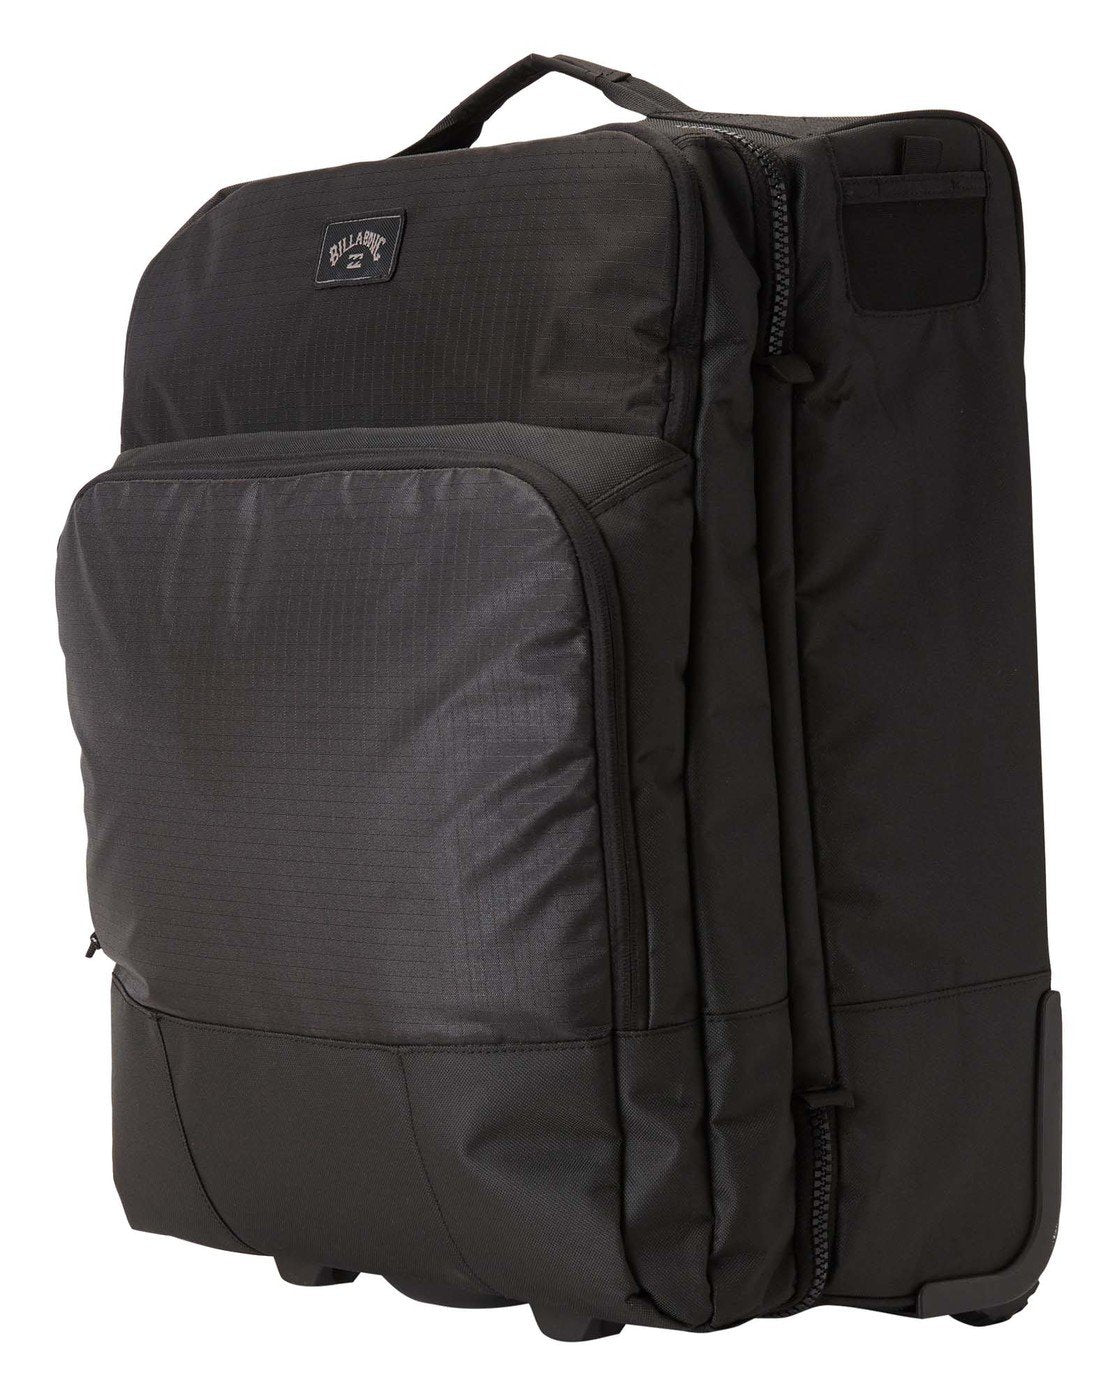 Booster Carryon Travel Luggage